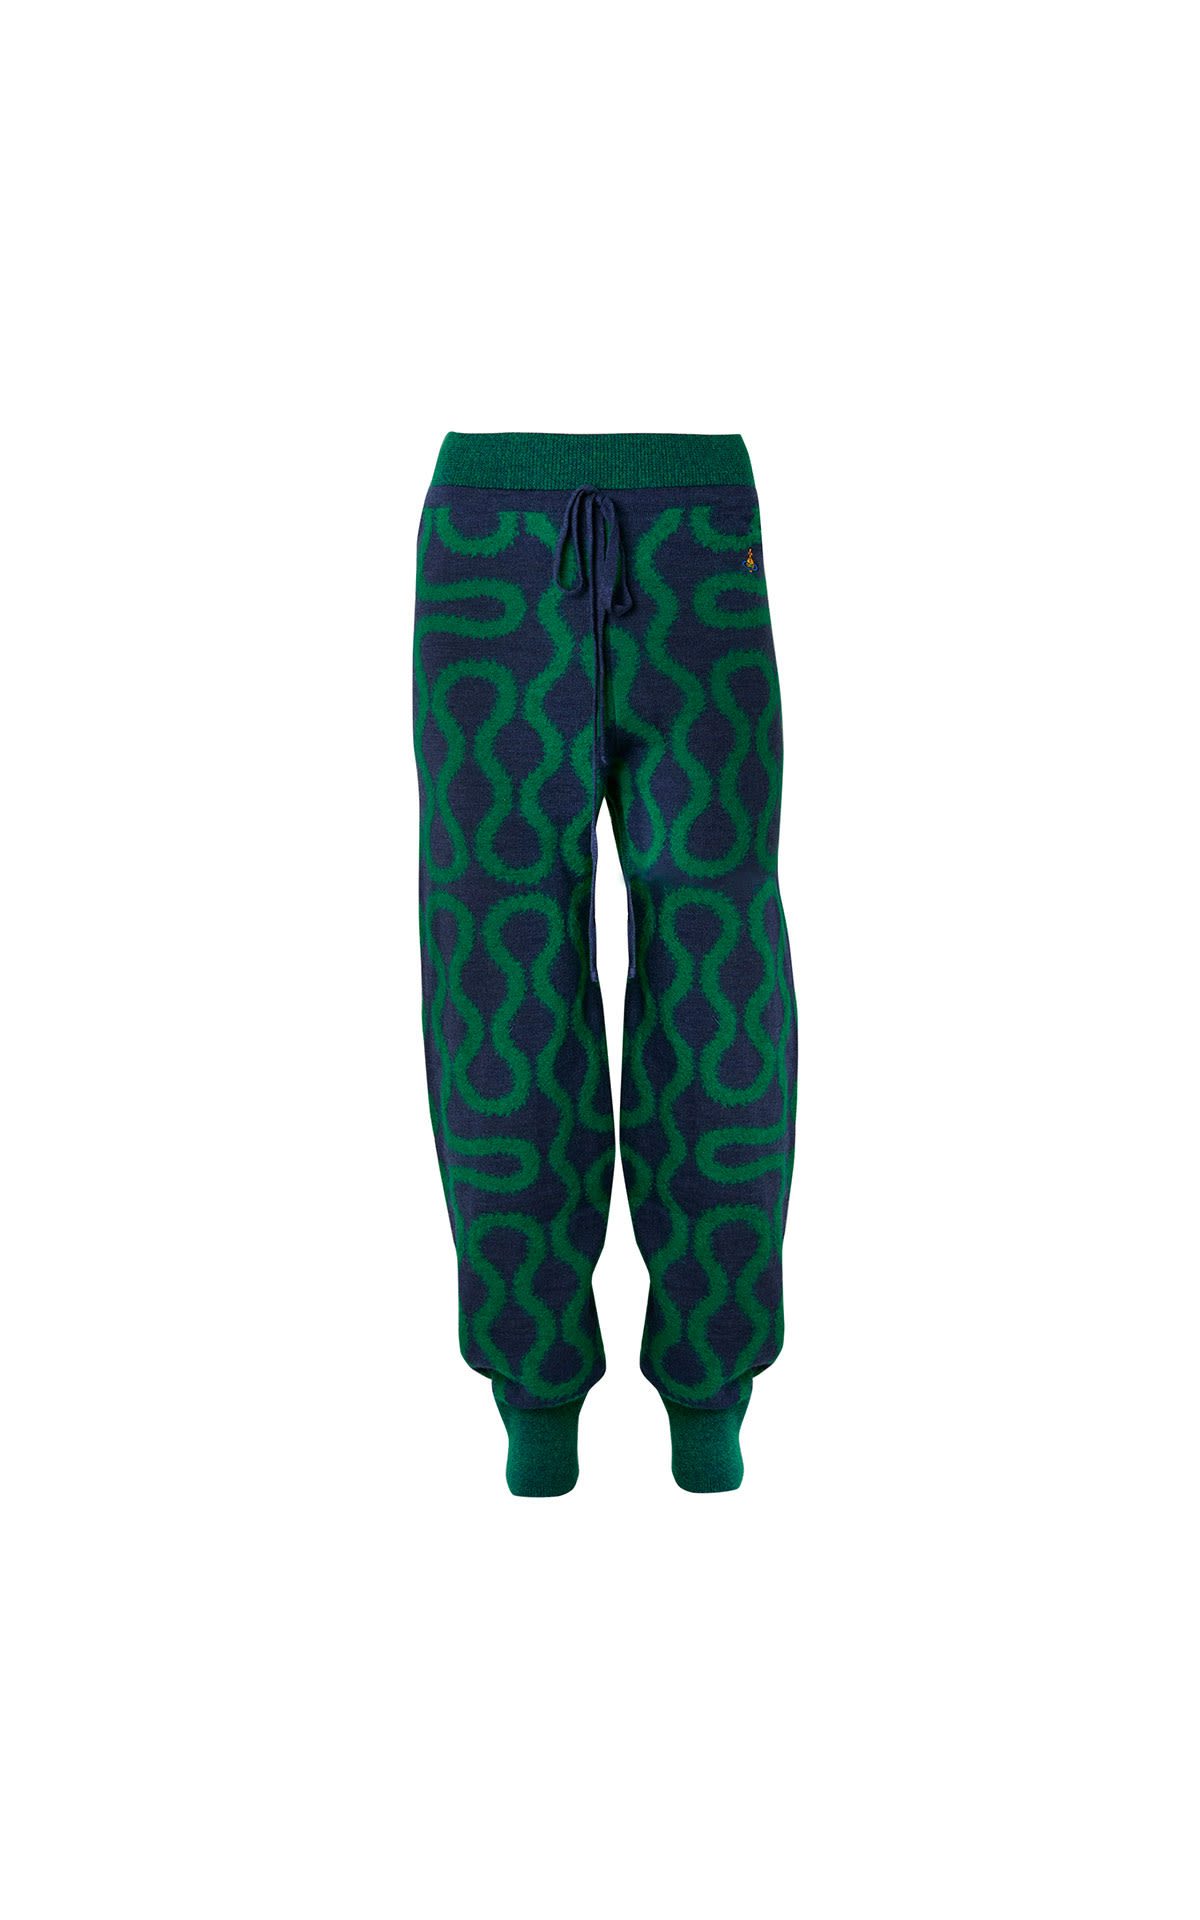 Vivienne Westwood Squiggle pants from Bicester Village